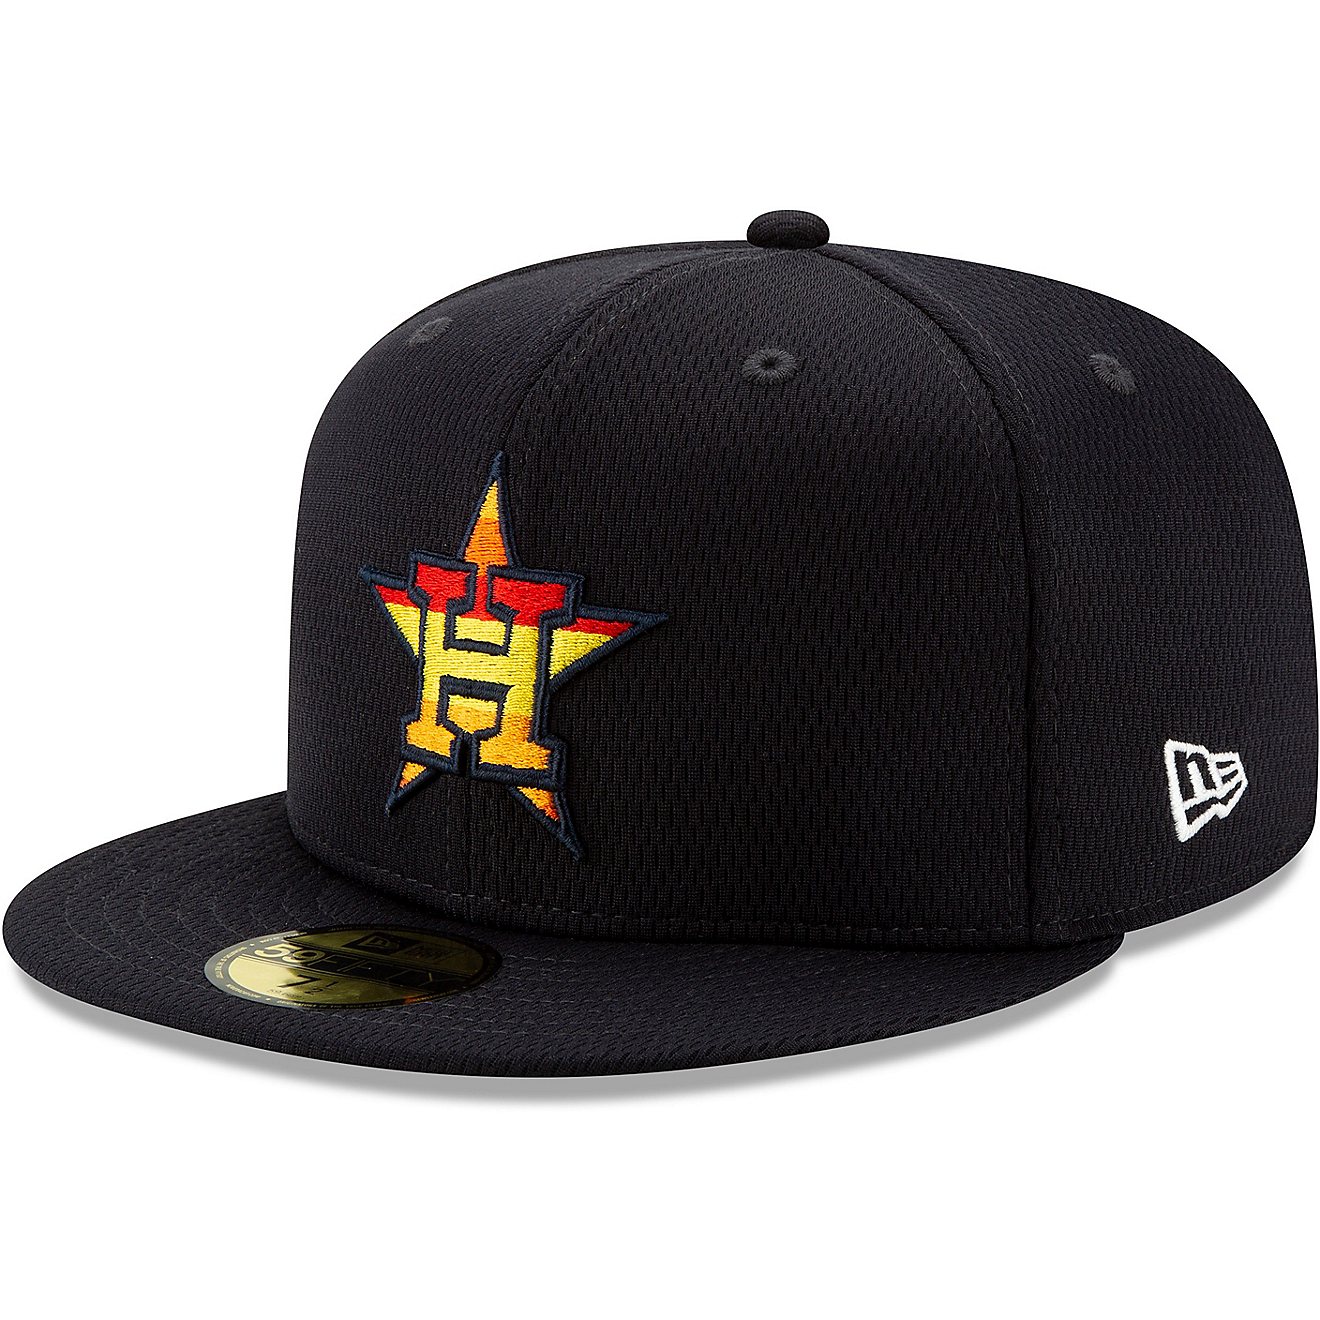 New Era Men's Houston Astros 59FIFTY On-Field Batting Practice Ball Cap                                                          - view number 3